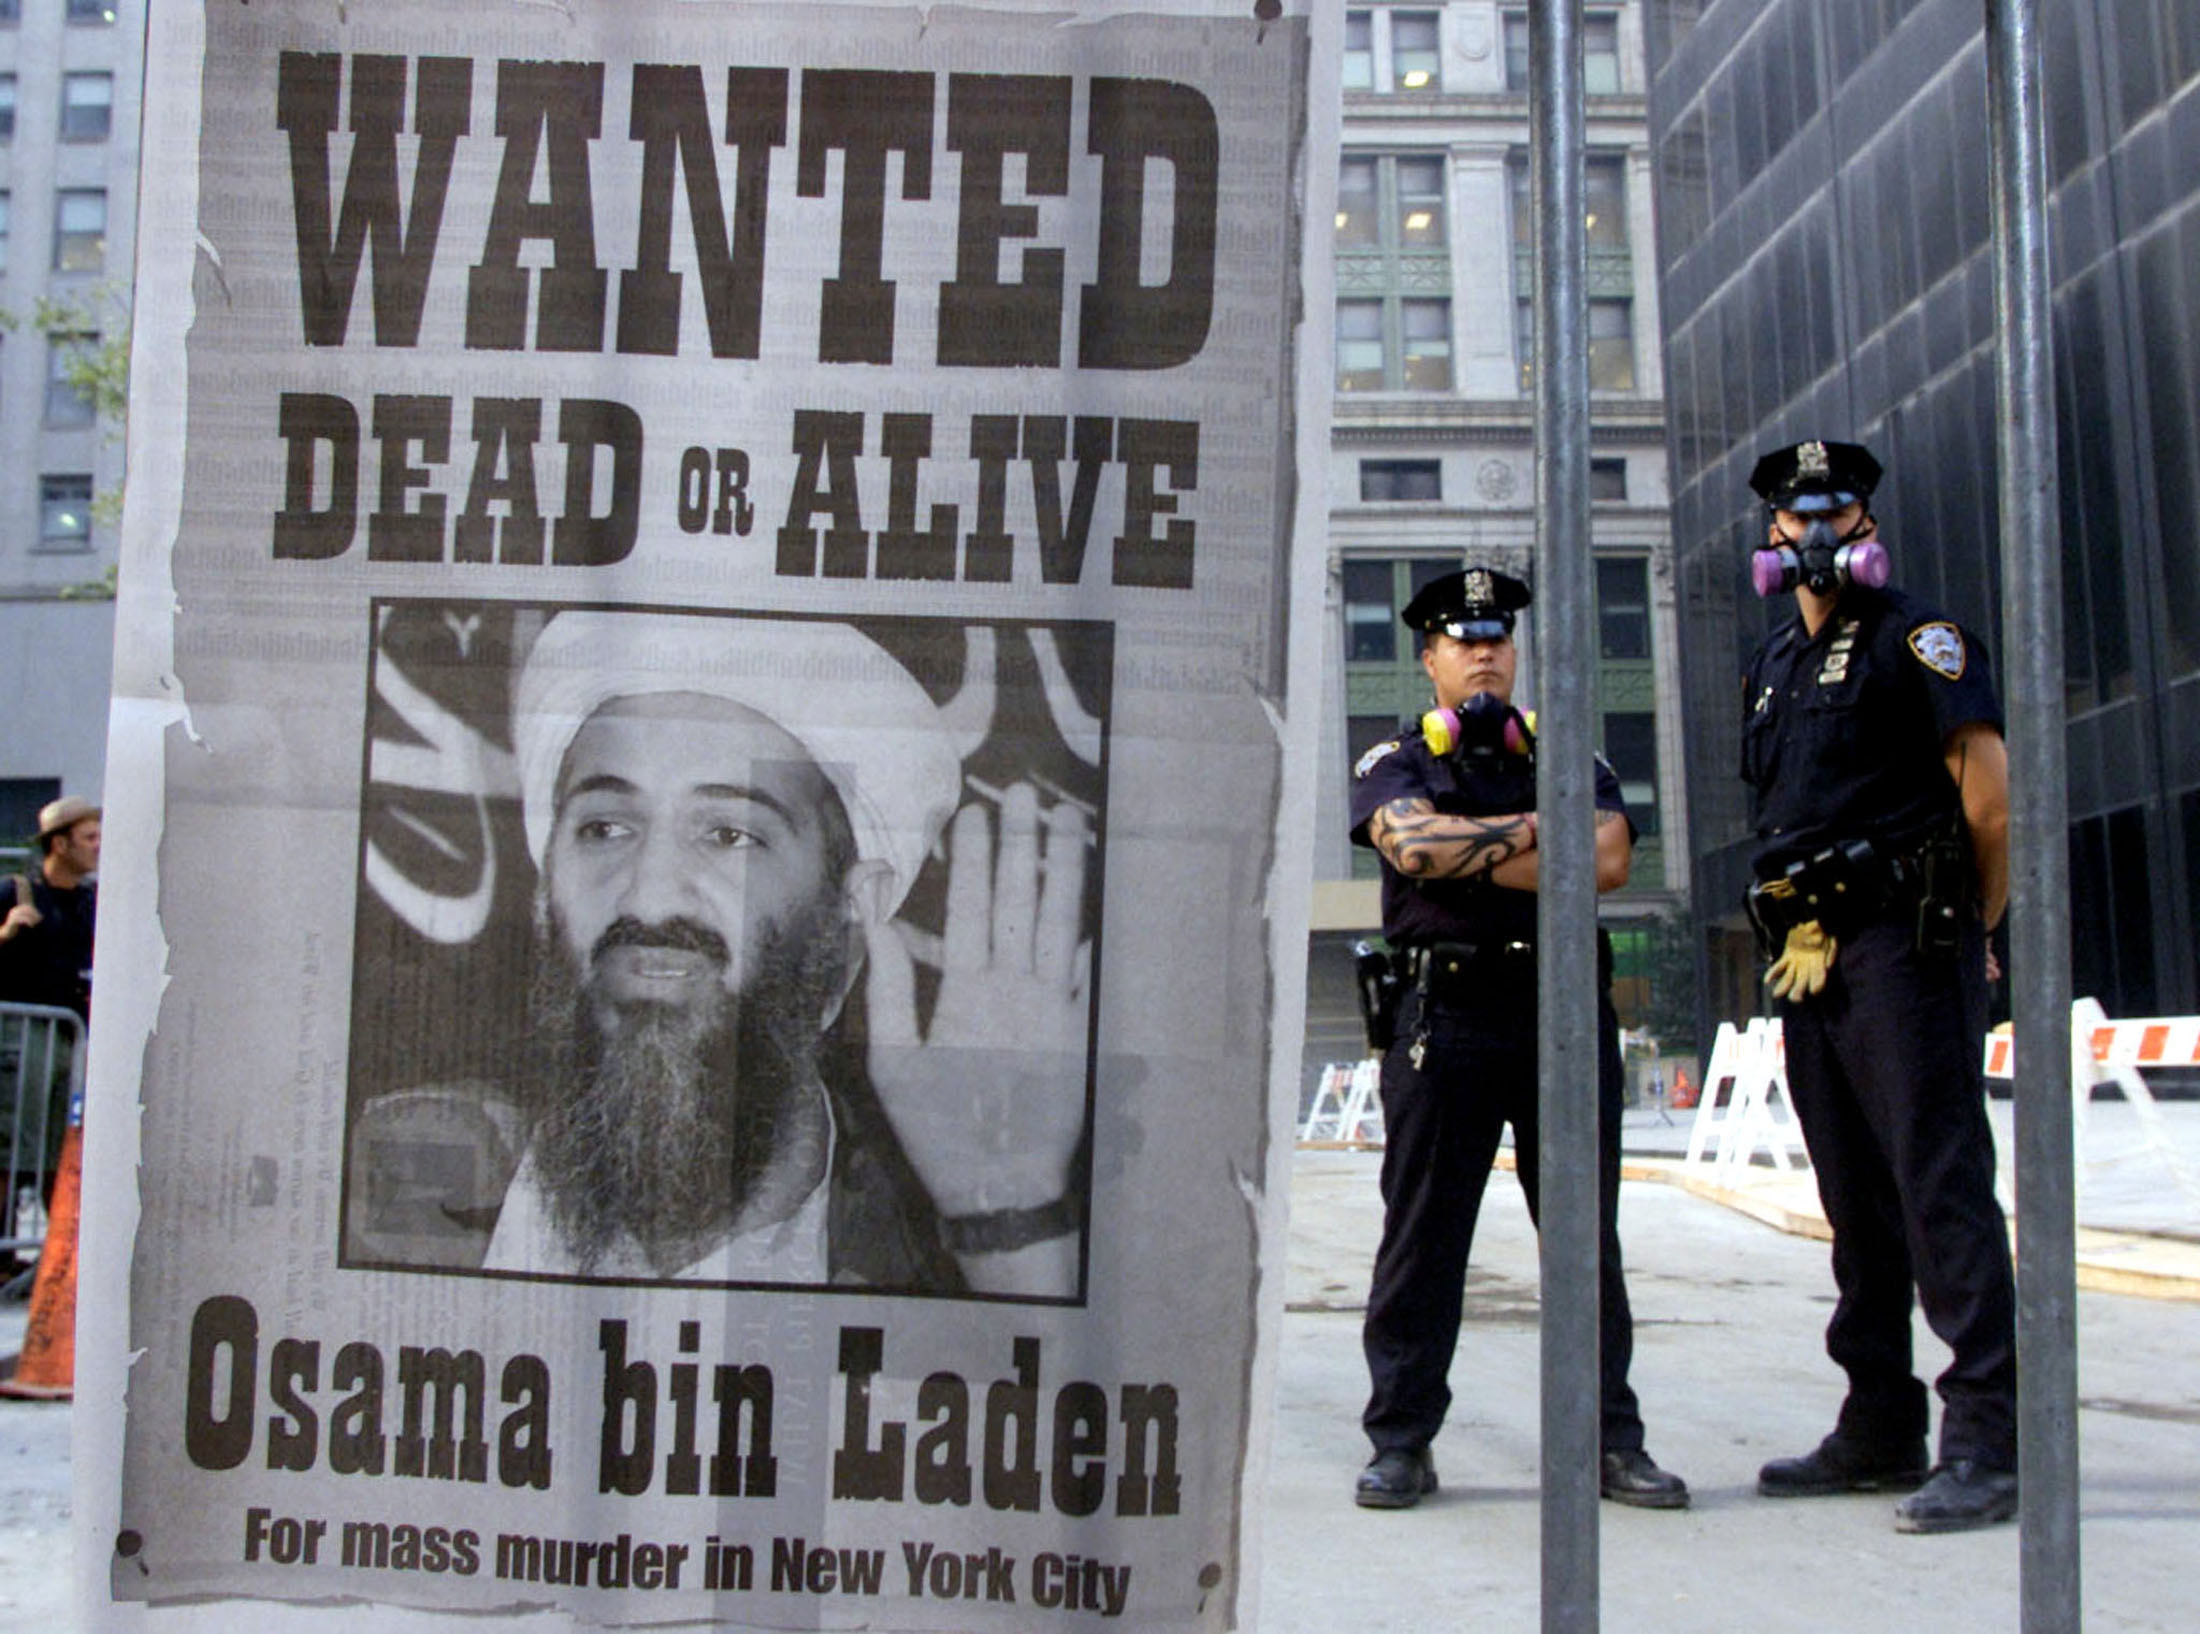 Police officers in New York stand near a full-page wanted poster for Osama bin Laden printed on a newspaper, in this file photo from September 18, 2001. Source: Russell Boyce/Reuters.